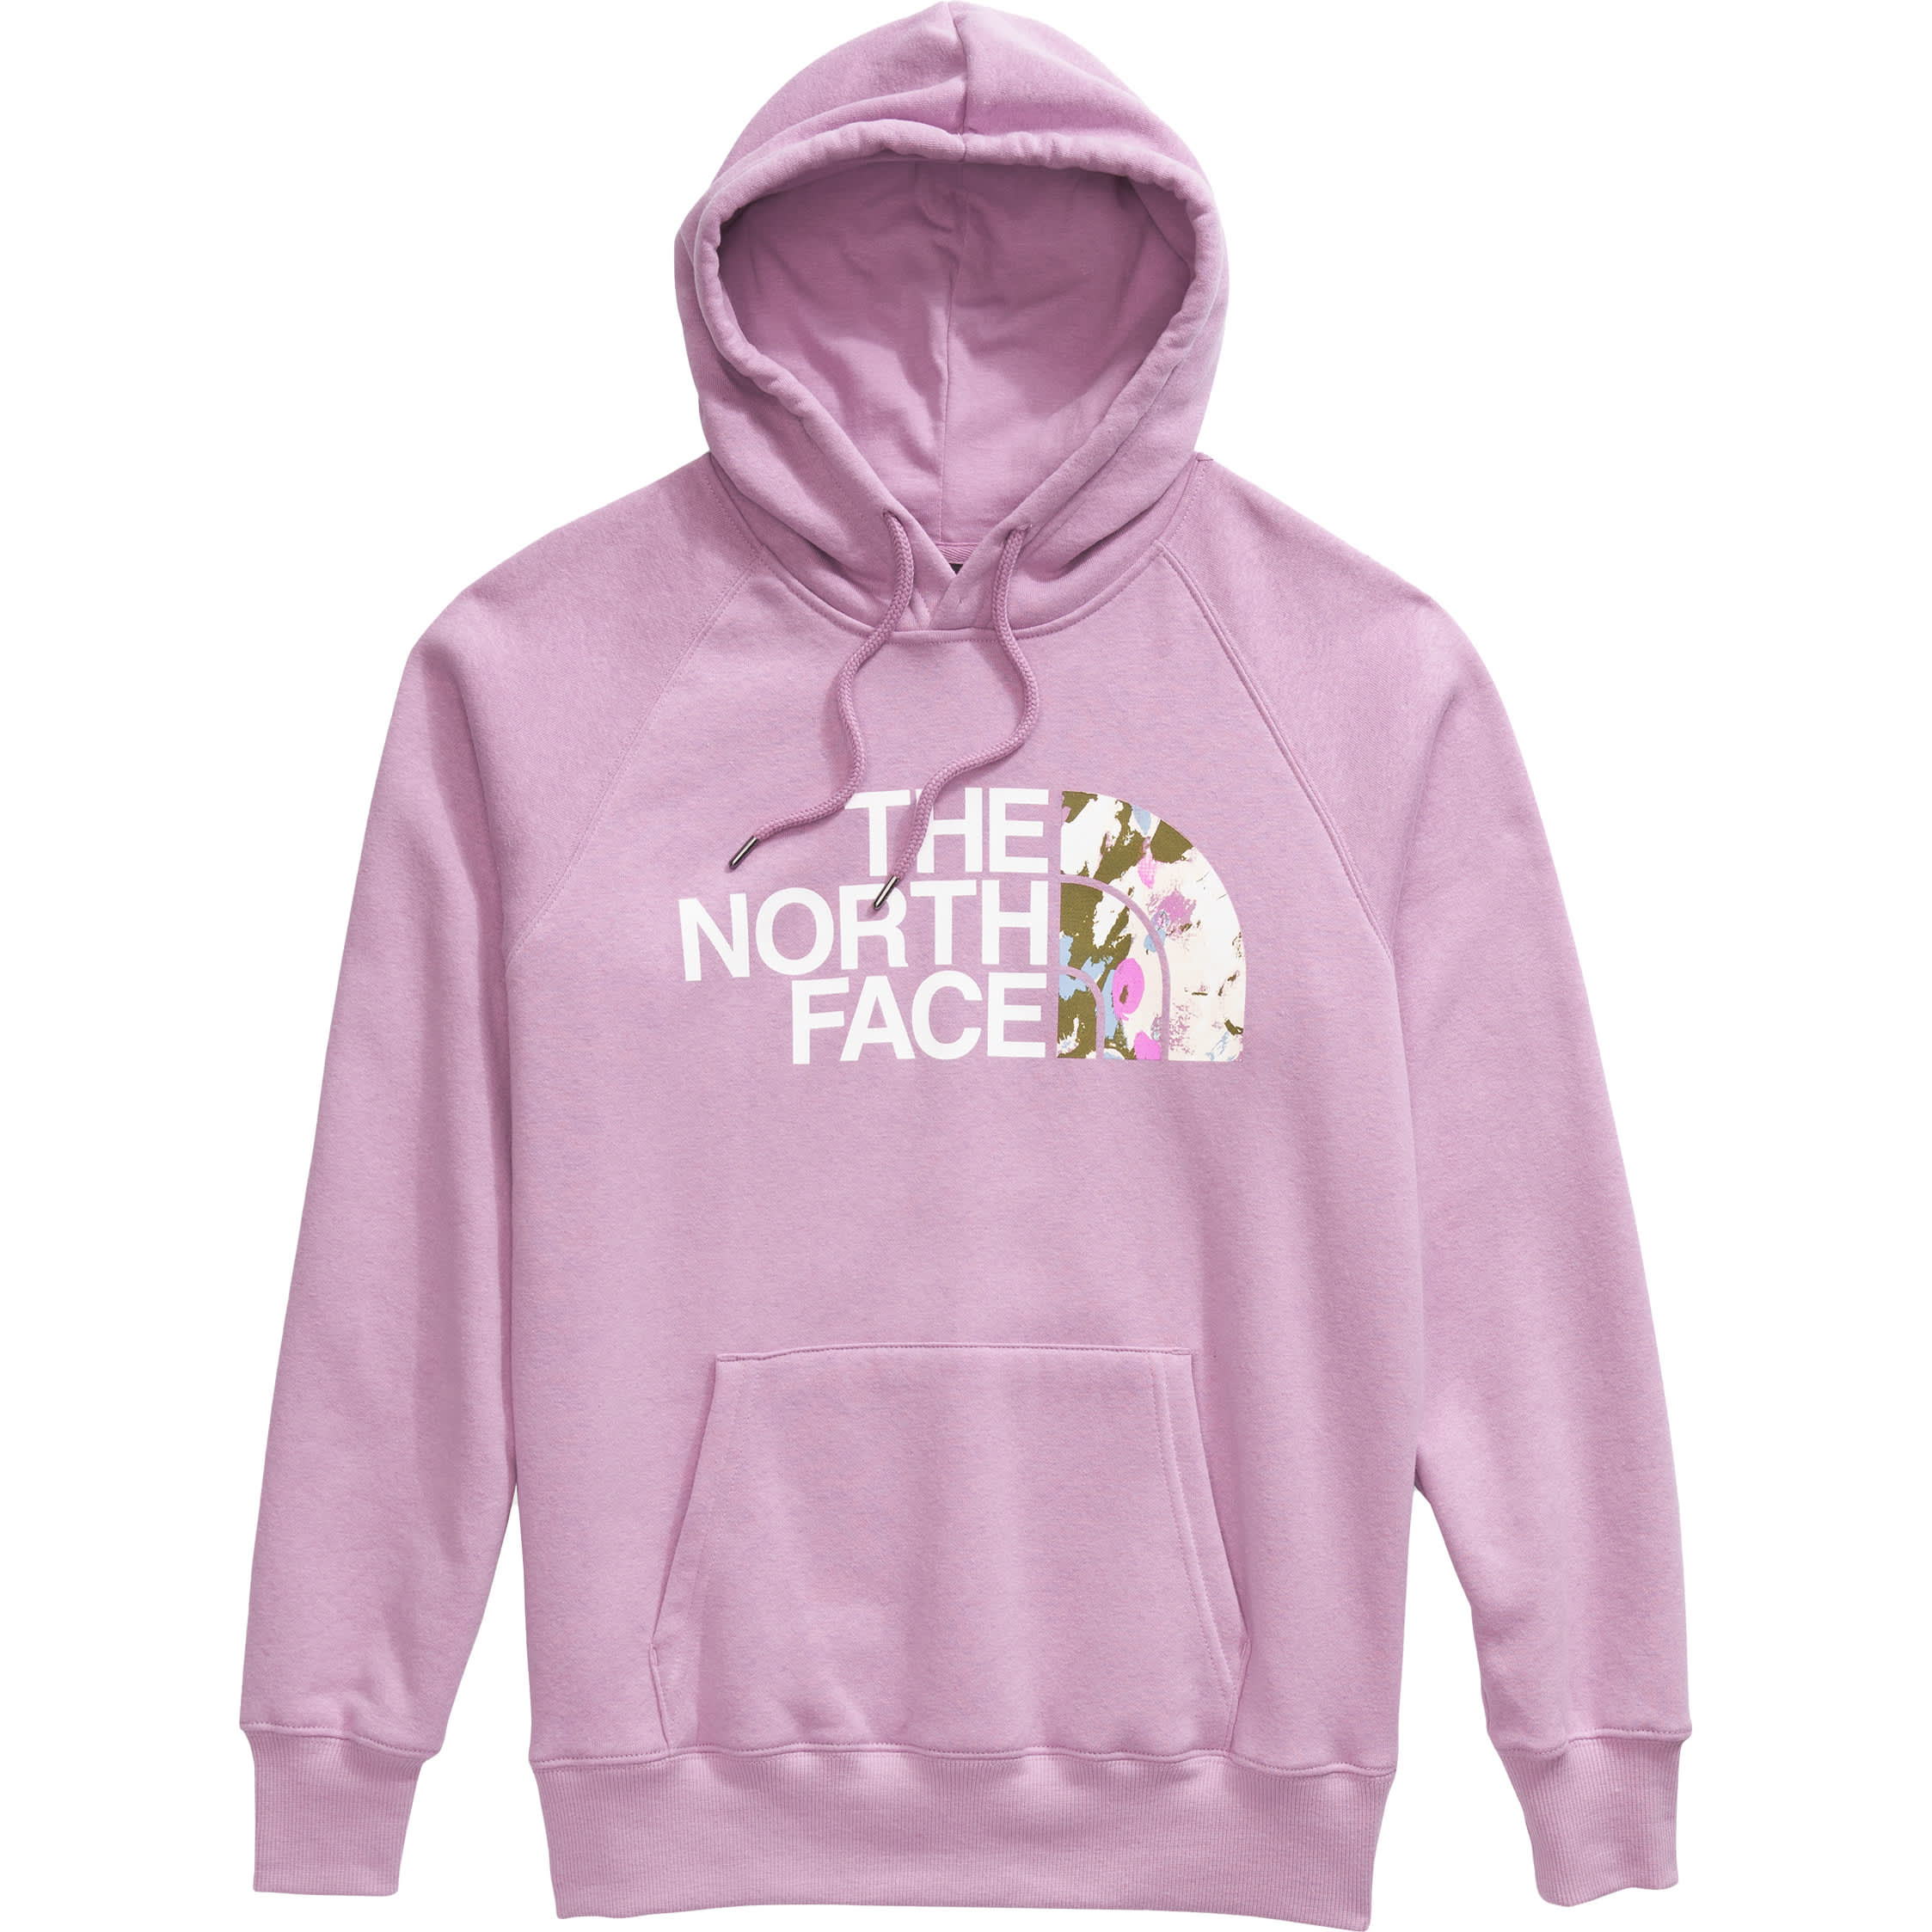 The North Face® Women’s Half Dome Hoodie